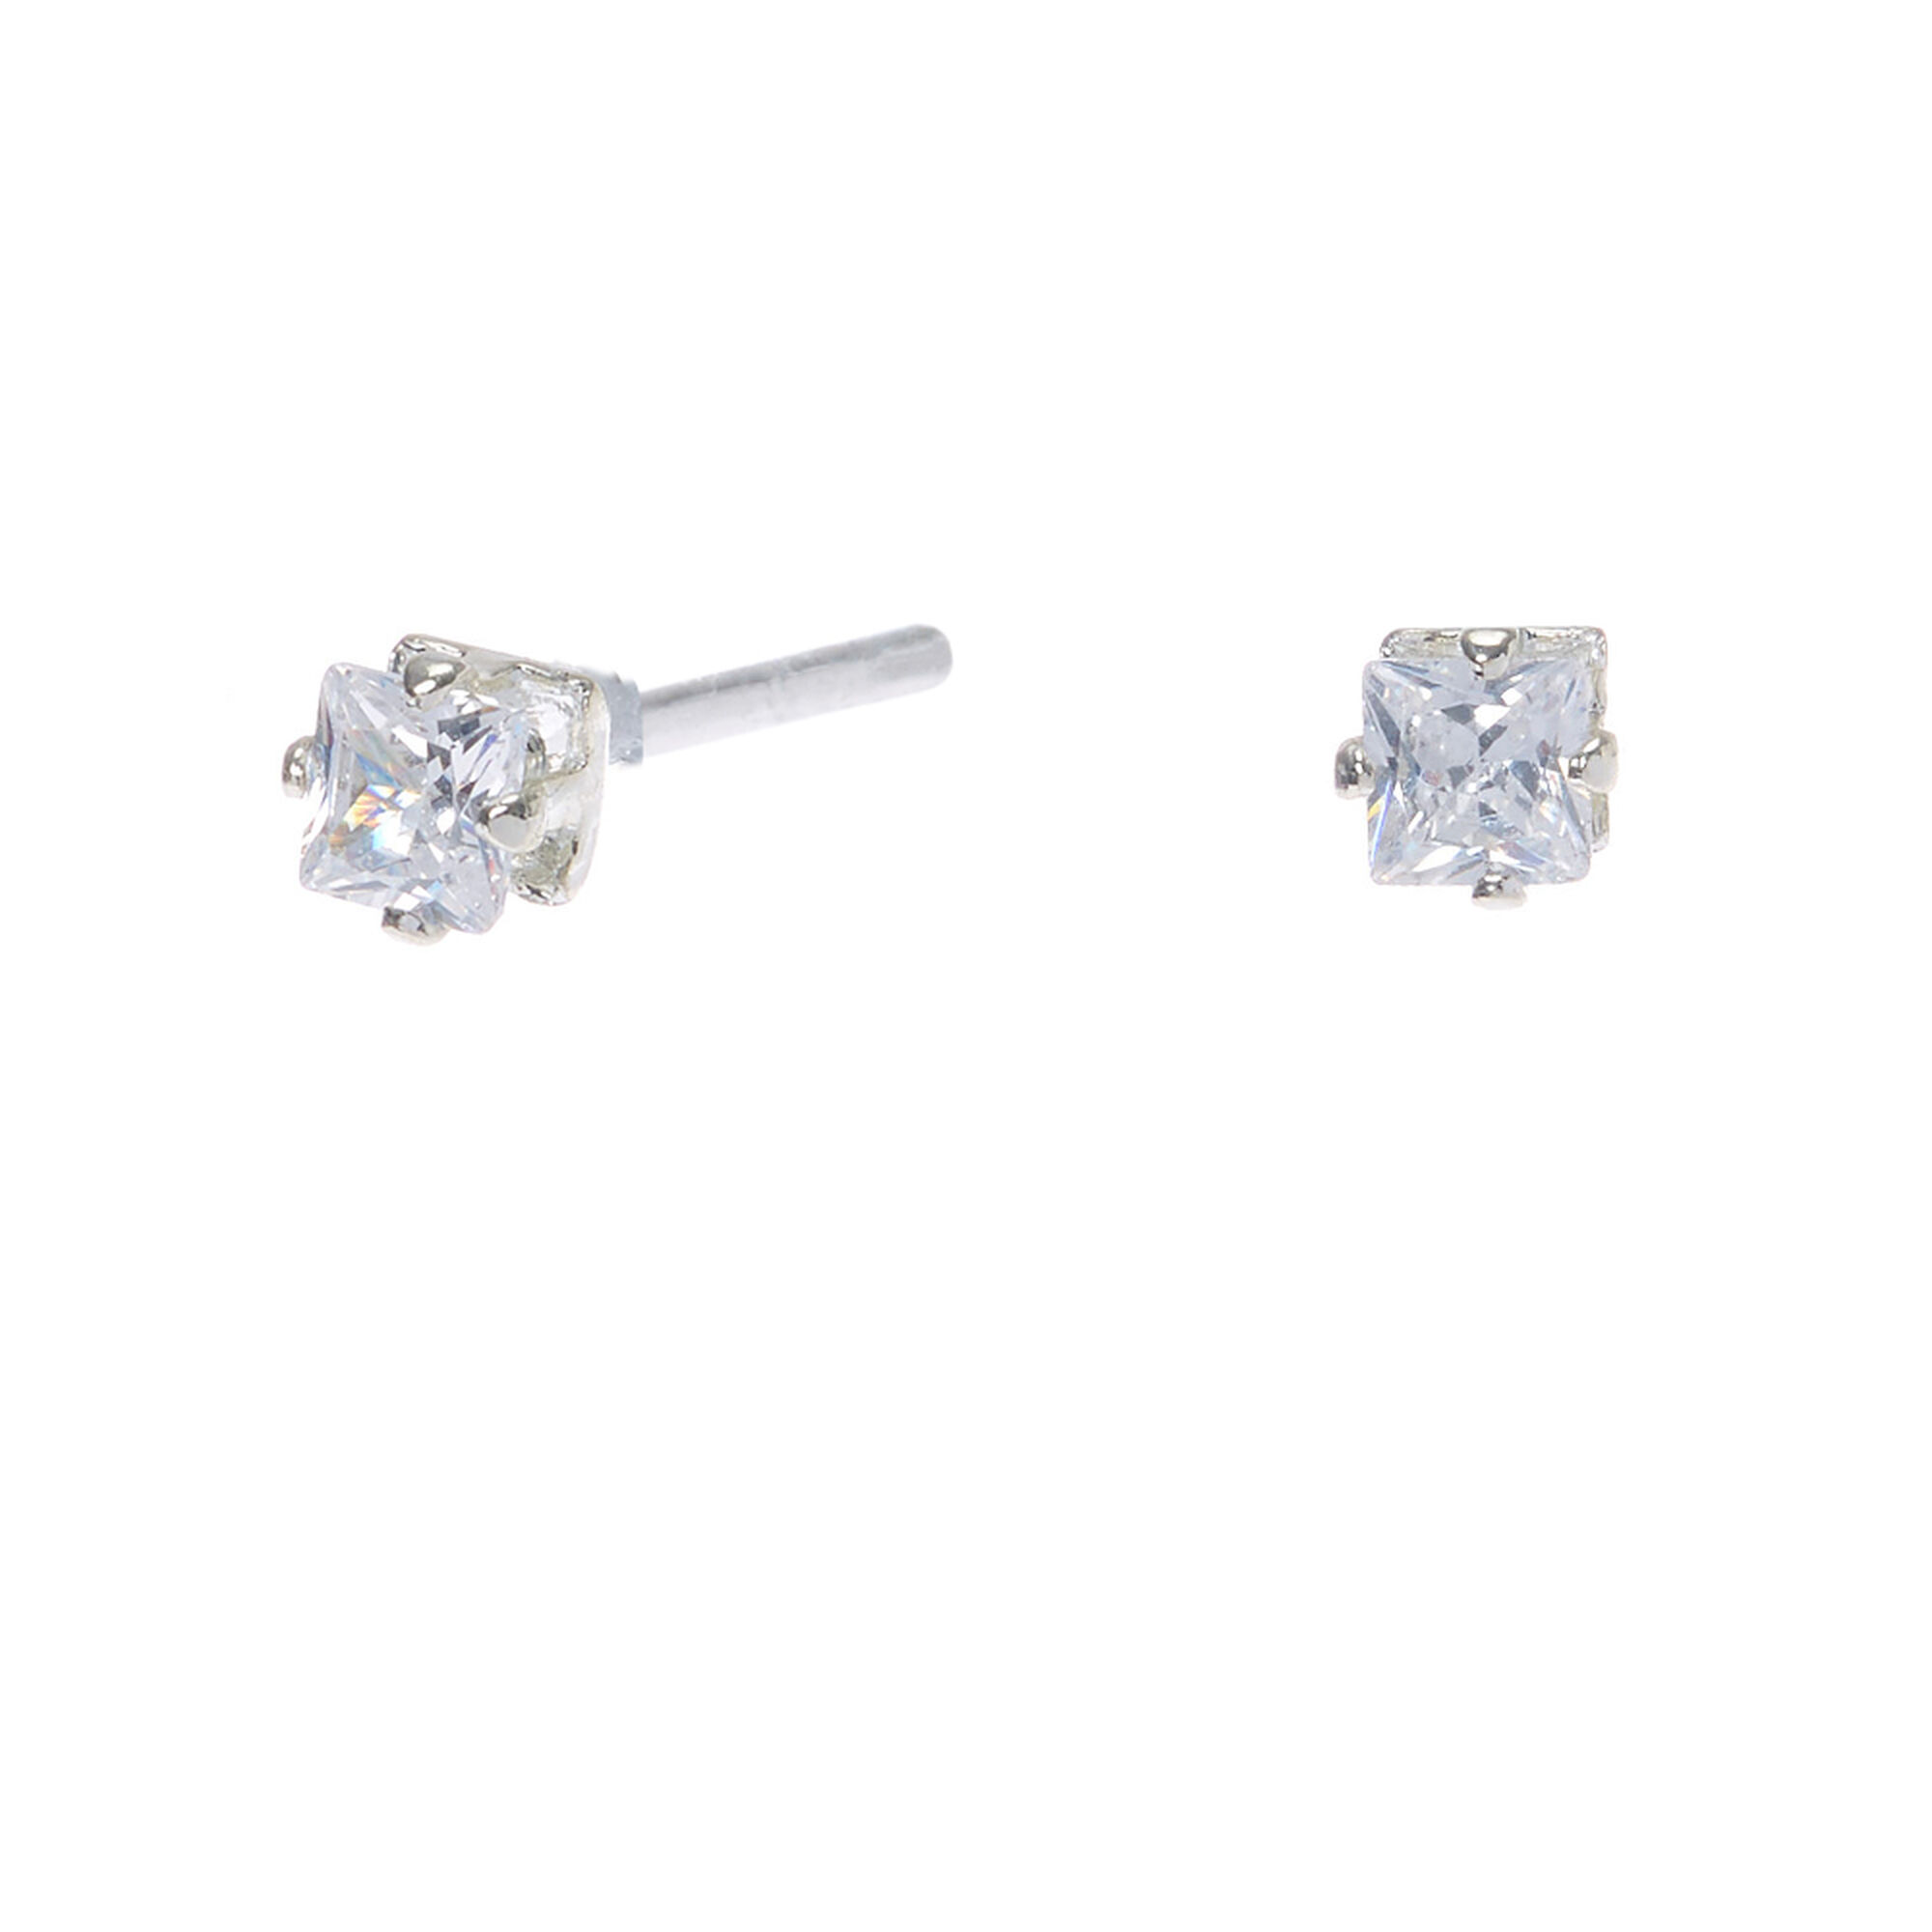 View Claires Tone Cubic Zirconia Square Stud Earrings 3MM Silver information